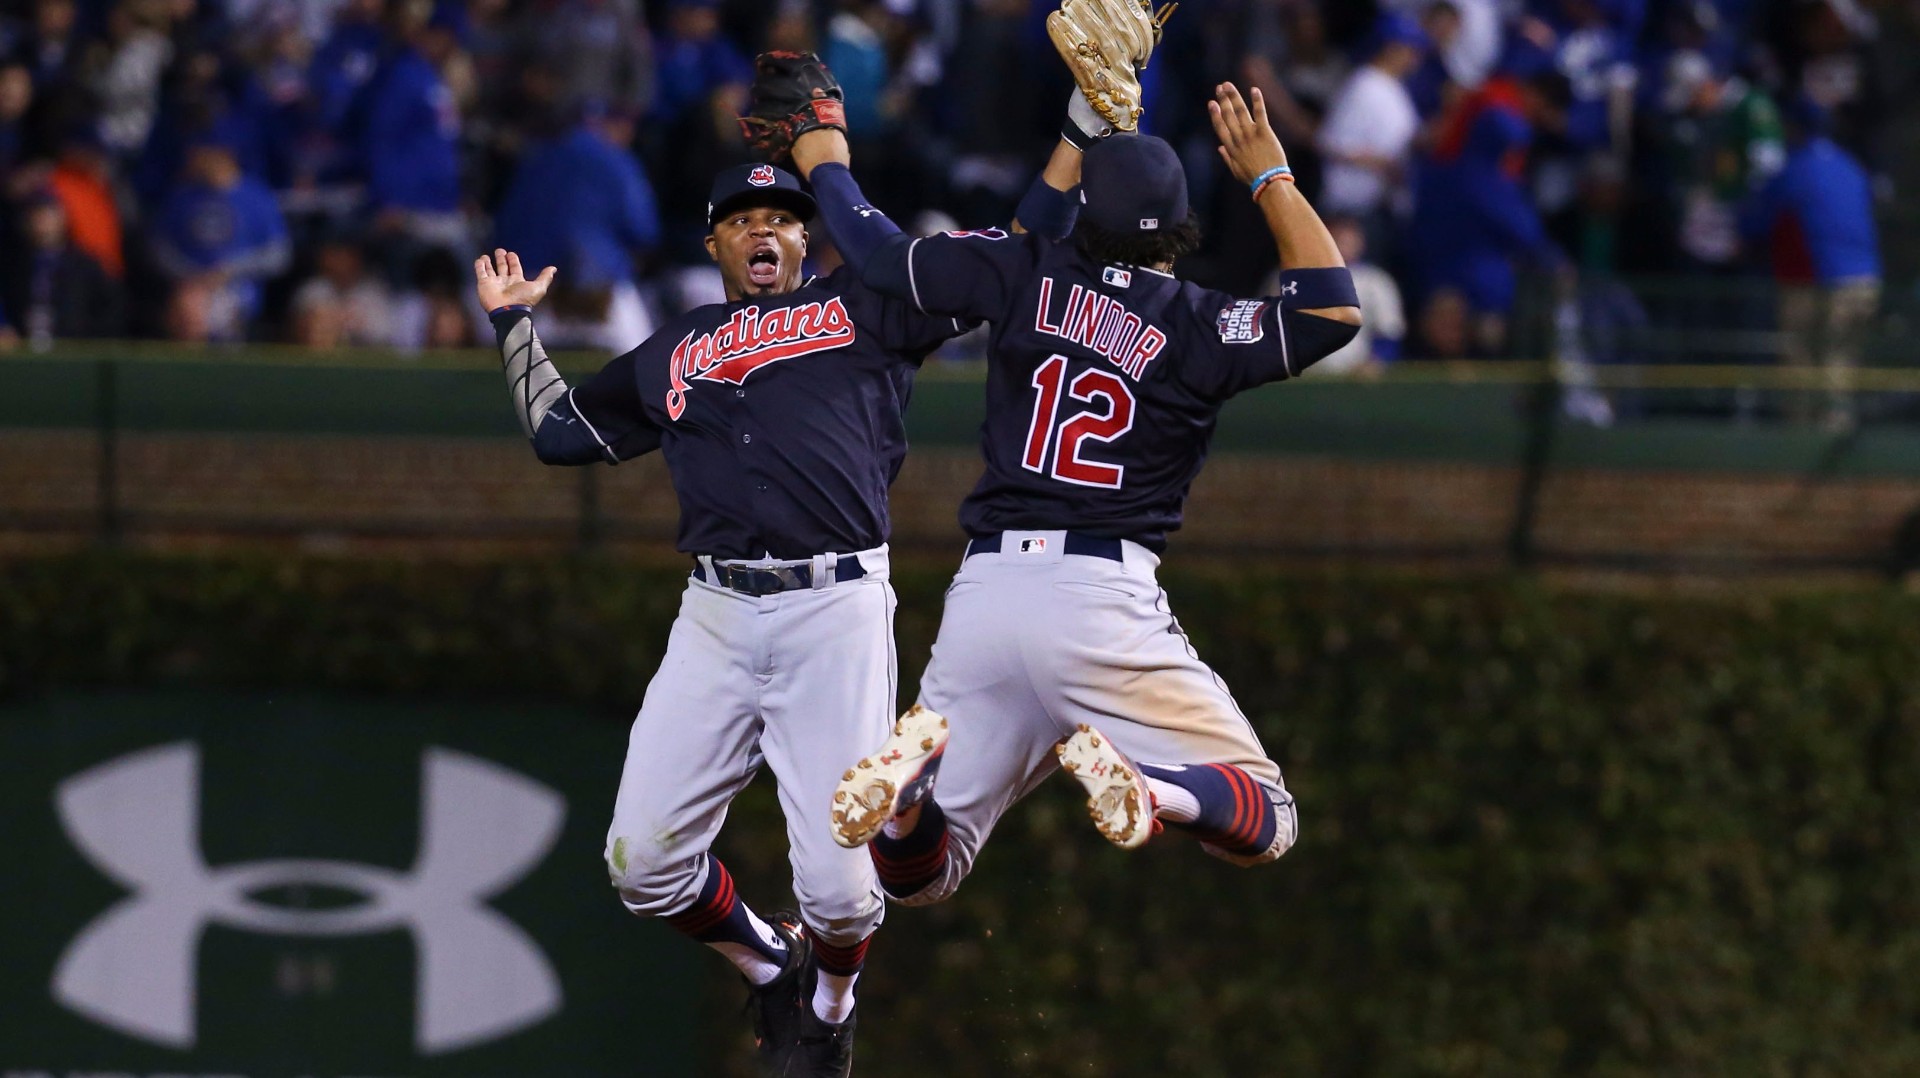 Indians beat Cubs 7-2, now lead World Series 3-1